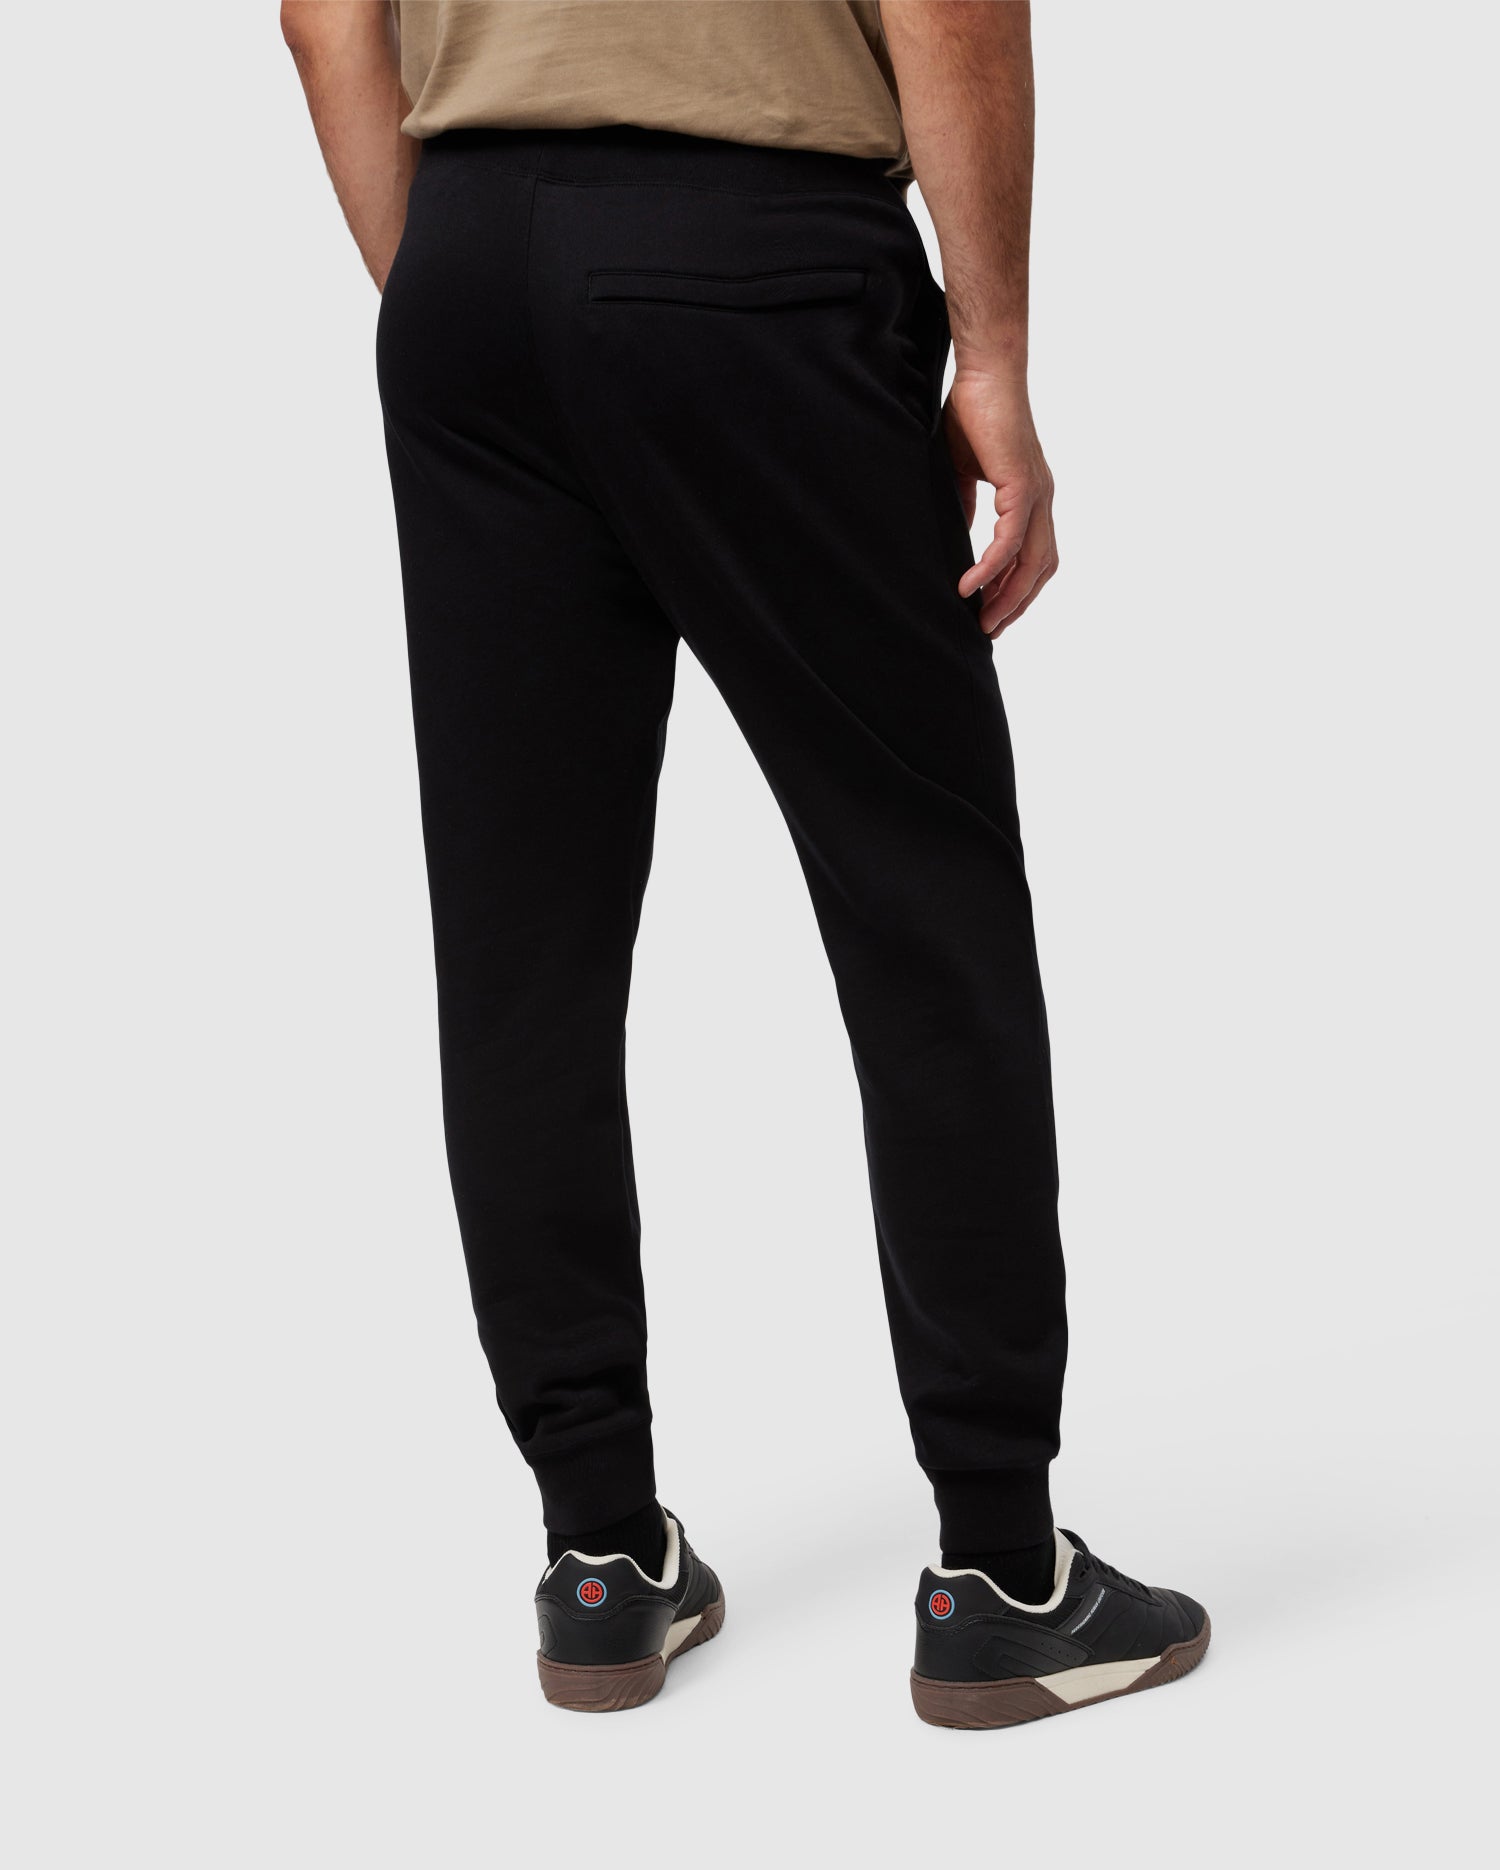 MENS BLACK APPLE VALLEY EMBROIDERED SWEATPANT | PSYCHO BUNNY – Psycho Bunny